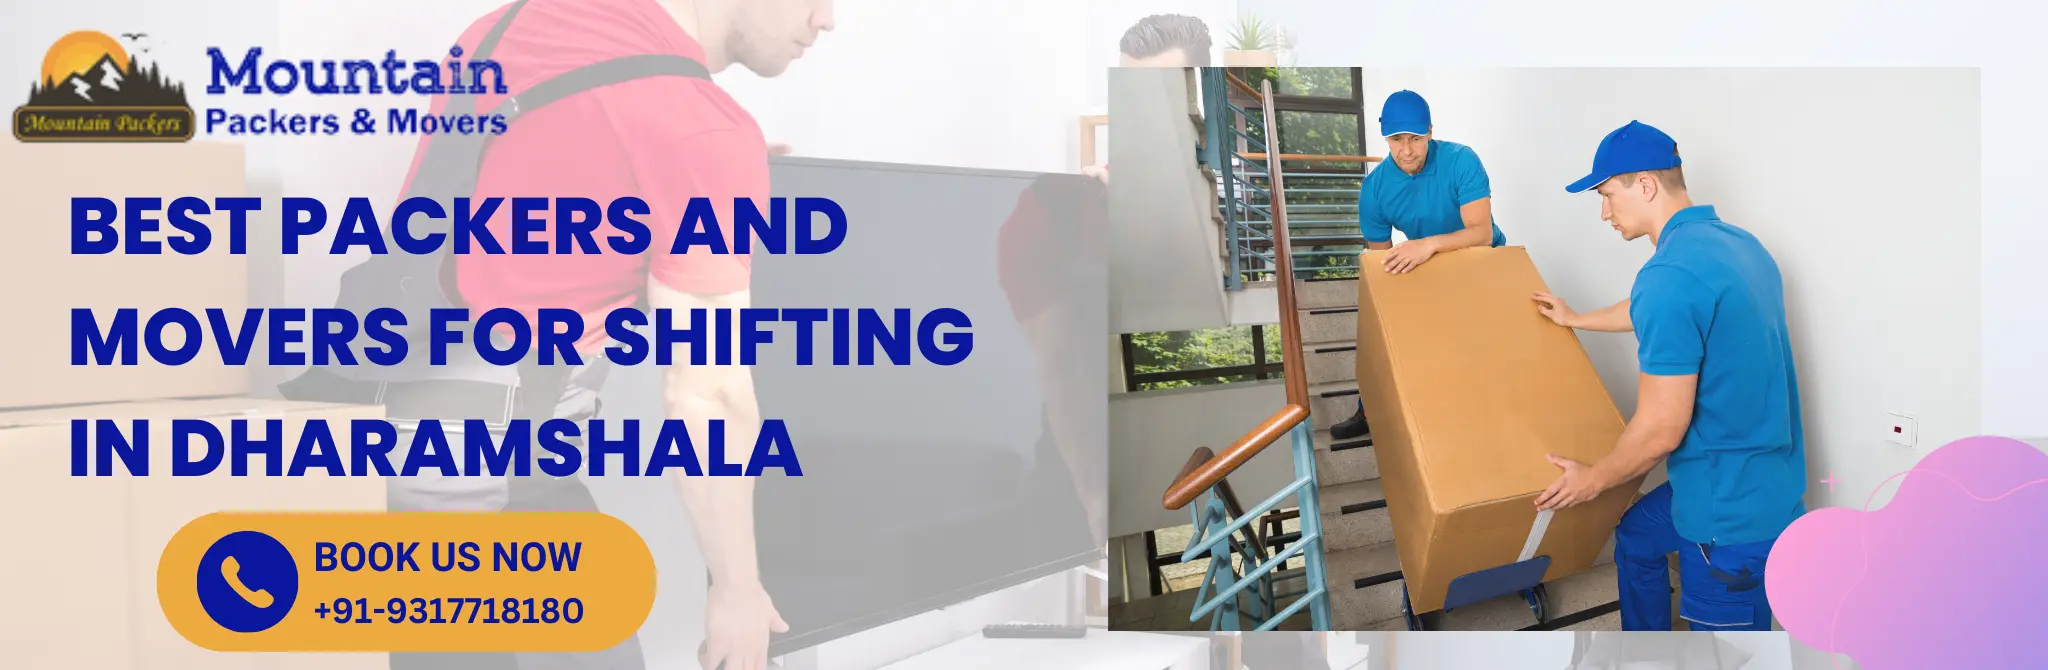 best packers and movers for shifting in Dharamshala